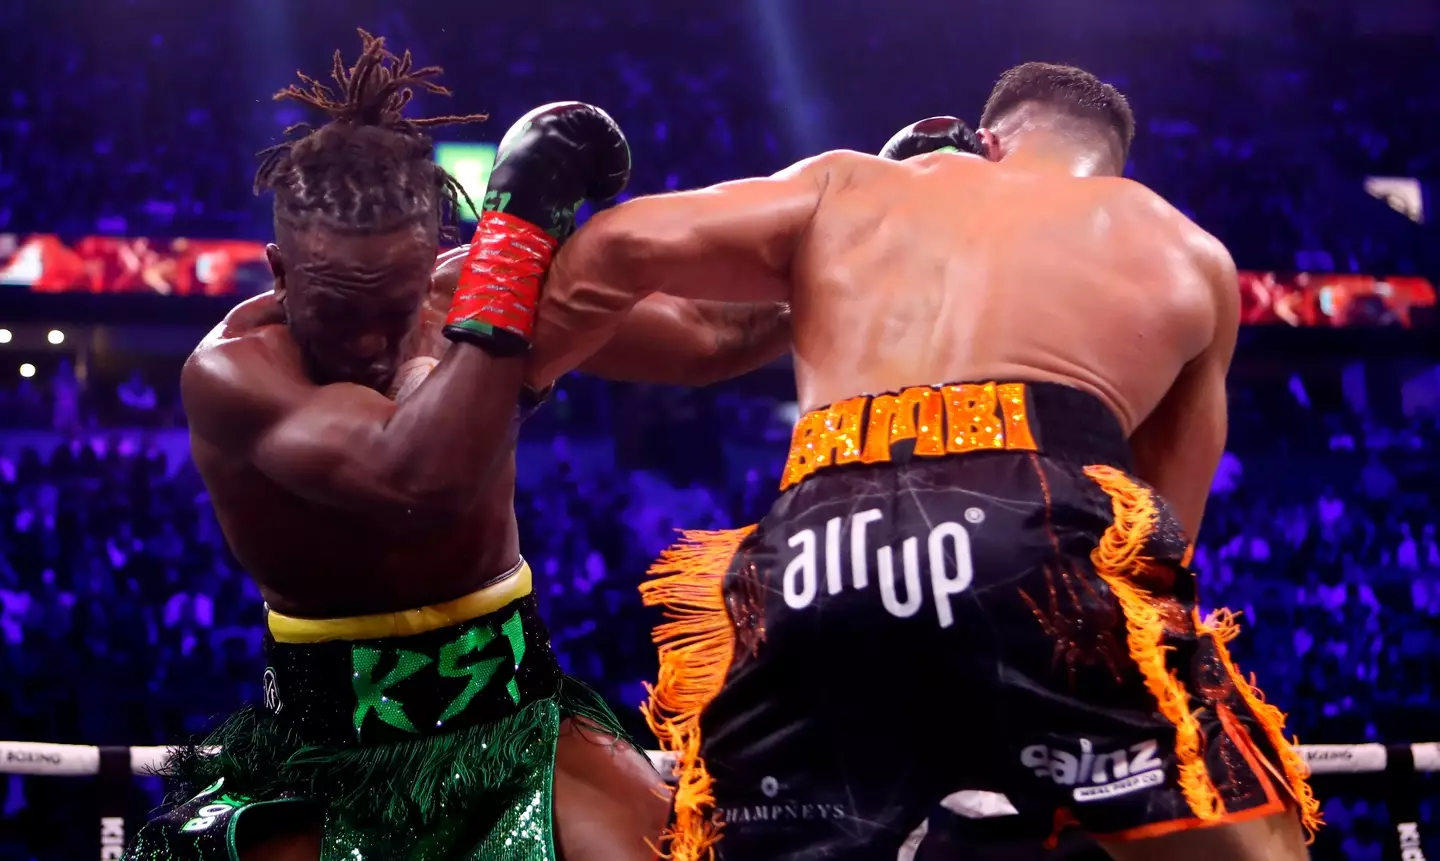 Tommy Fury and KSI in action during their bout during the MF and DAZN: X Series event at the AO Arena, Manchester.